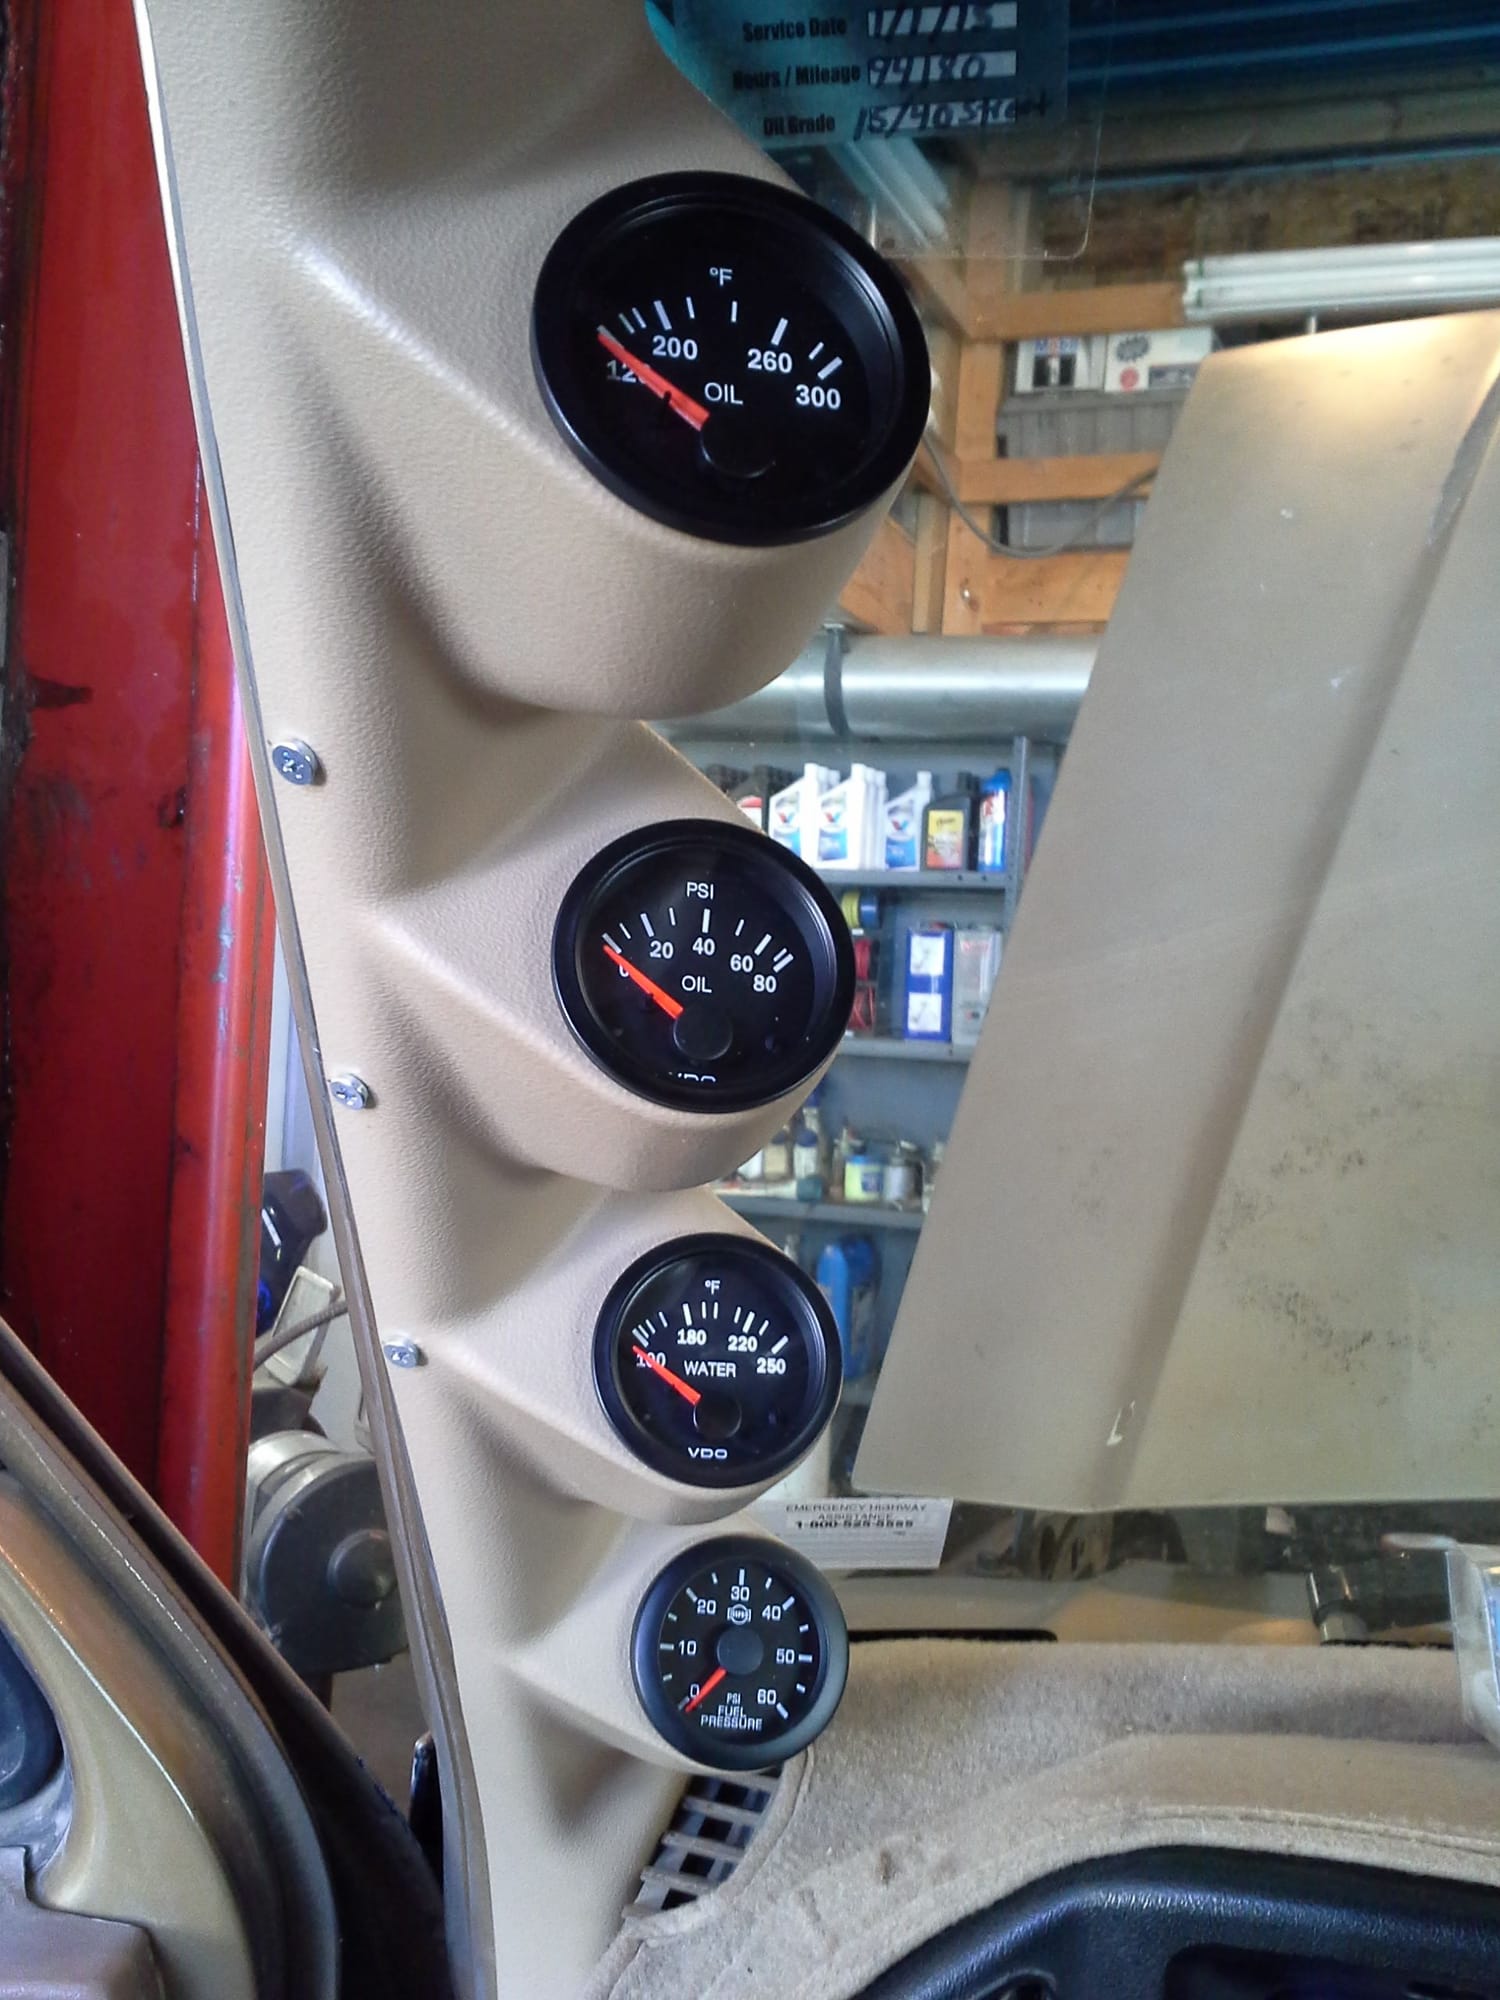 Suggestions for gauges - Ford Truck Enthusiasts Forums 2013 Ford F150 Oil Pressure Gauge Fluctuation